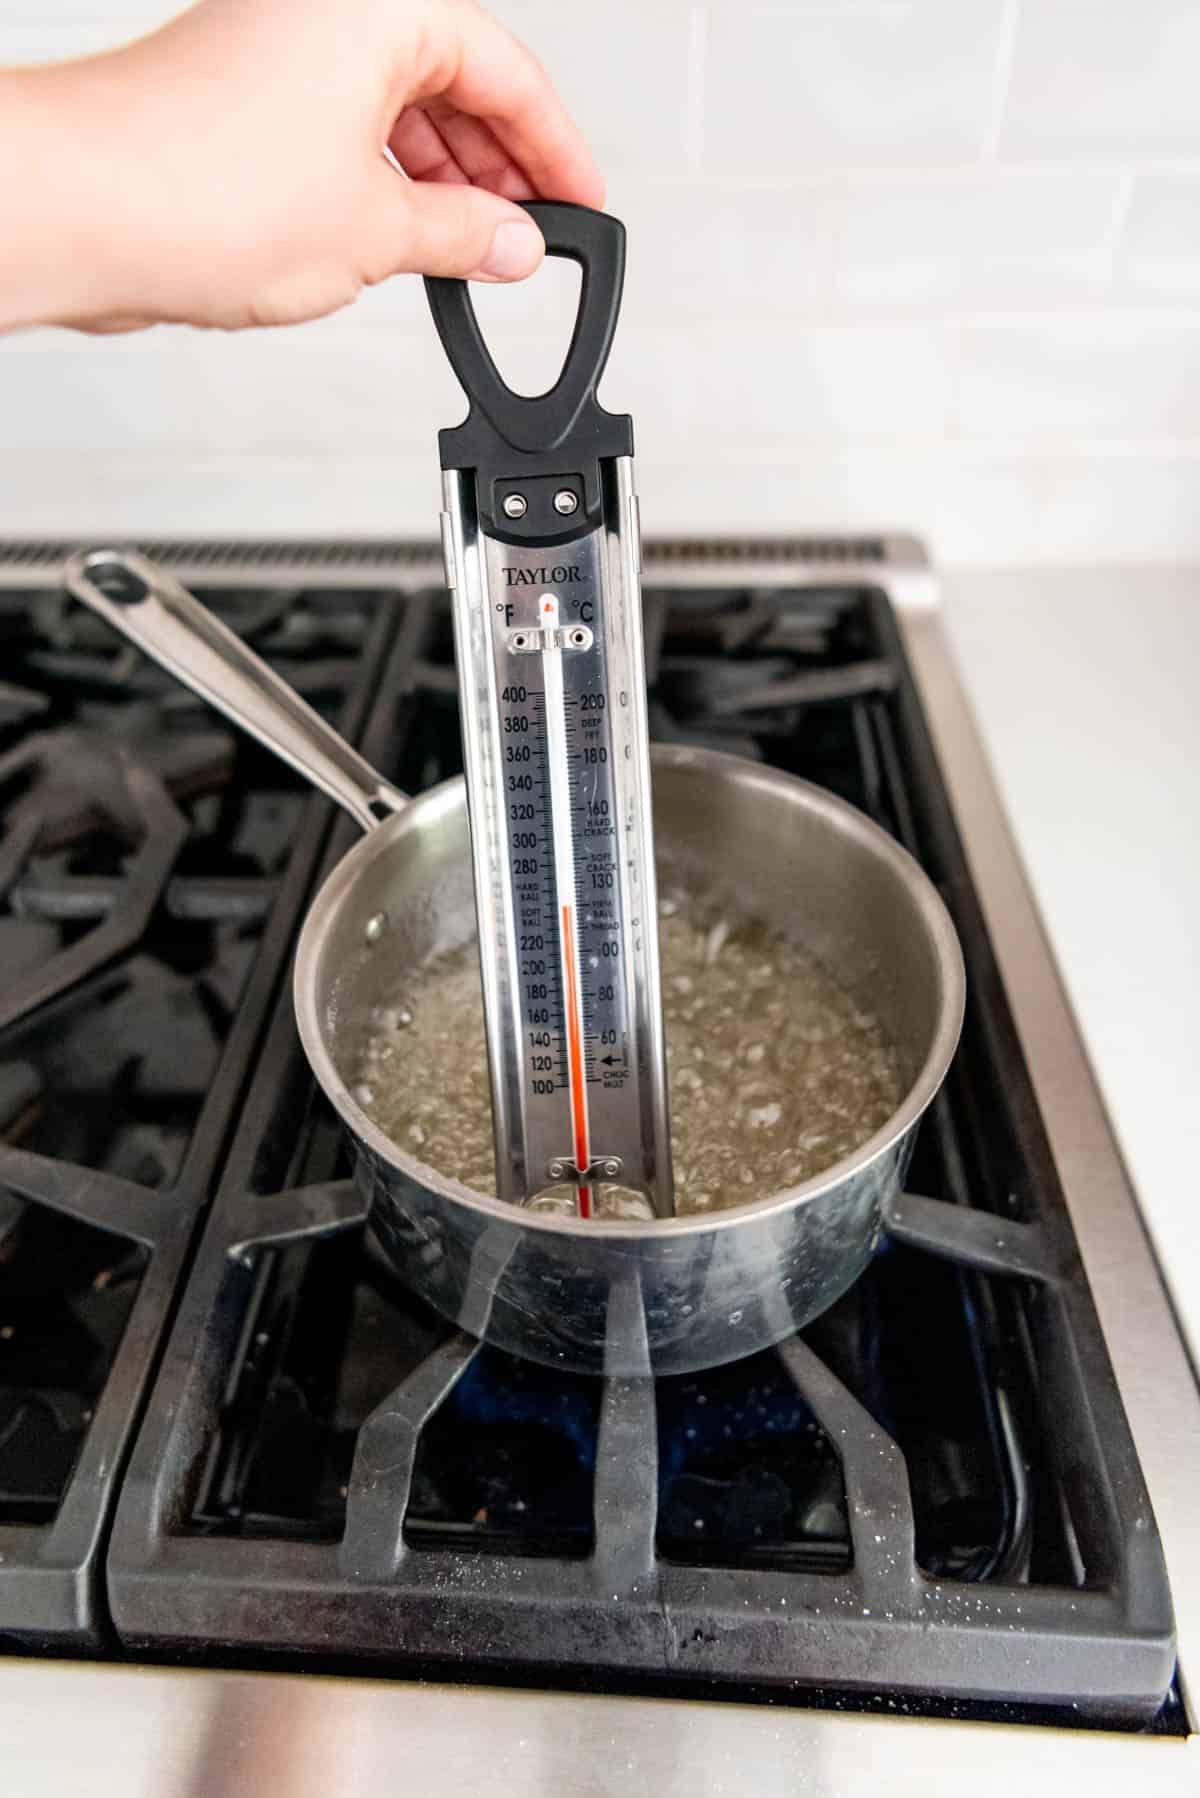 Candy thermometer in a pot of boiling sugar, water and corn syrup for making divinity candy.